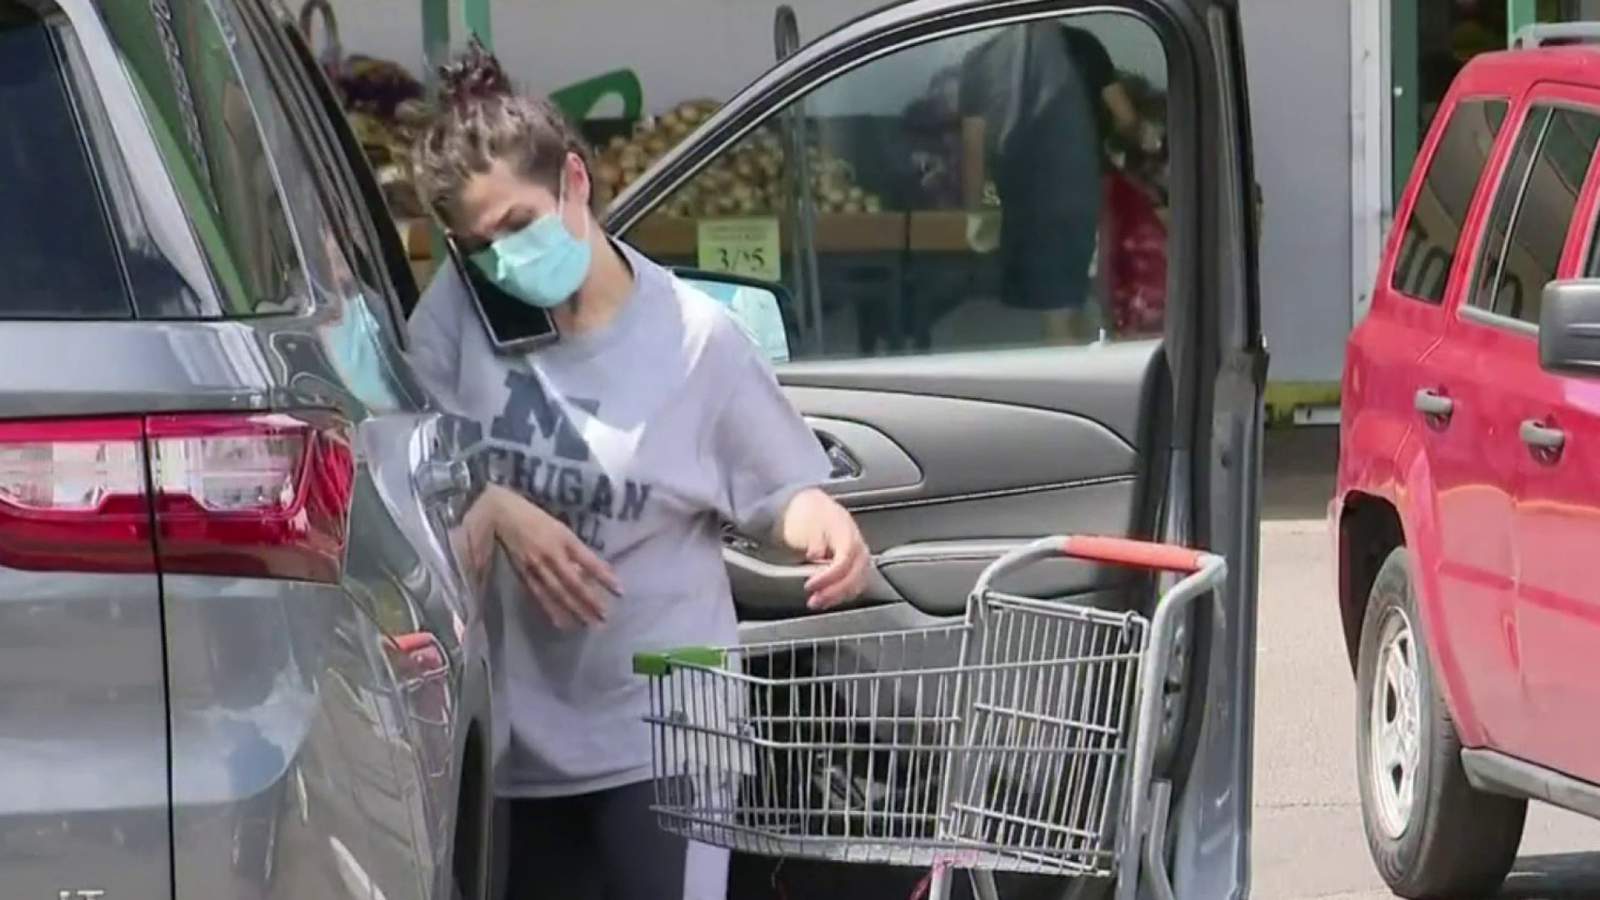 Metro Detroit woman who cant medically tolerate mask says businesses hesitant to believe her